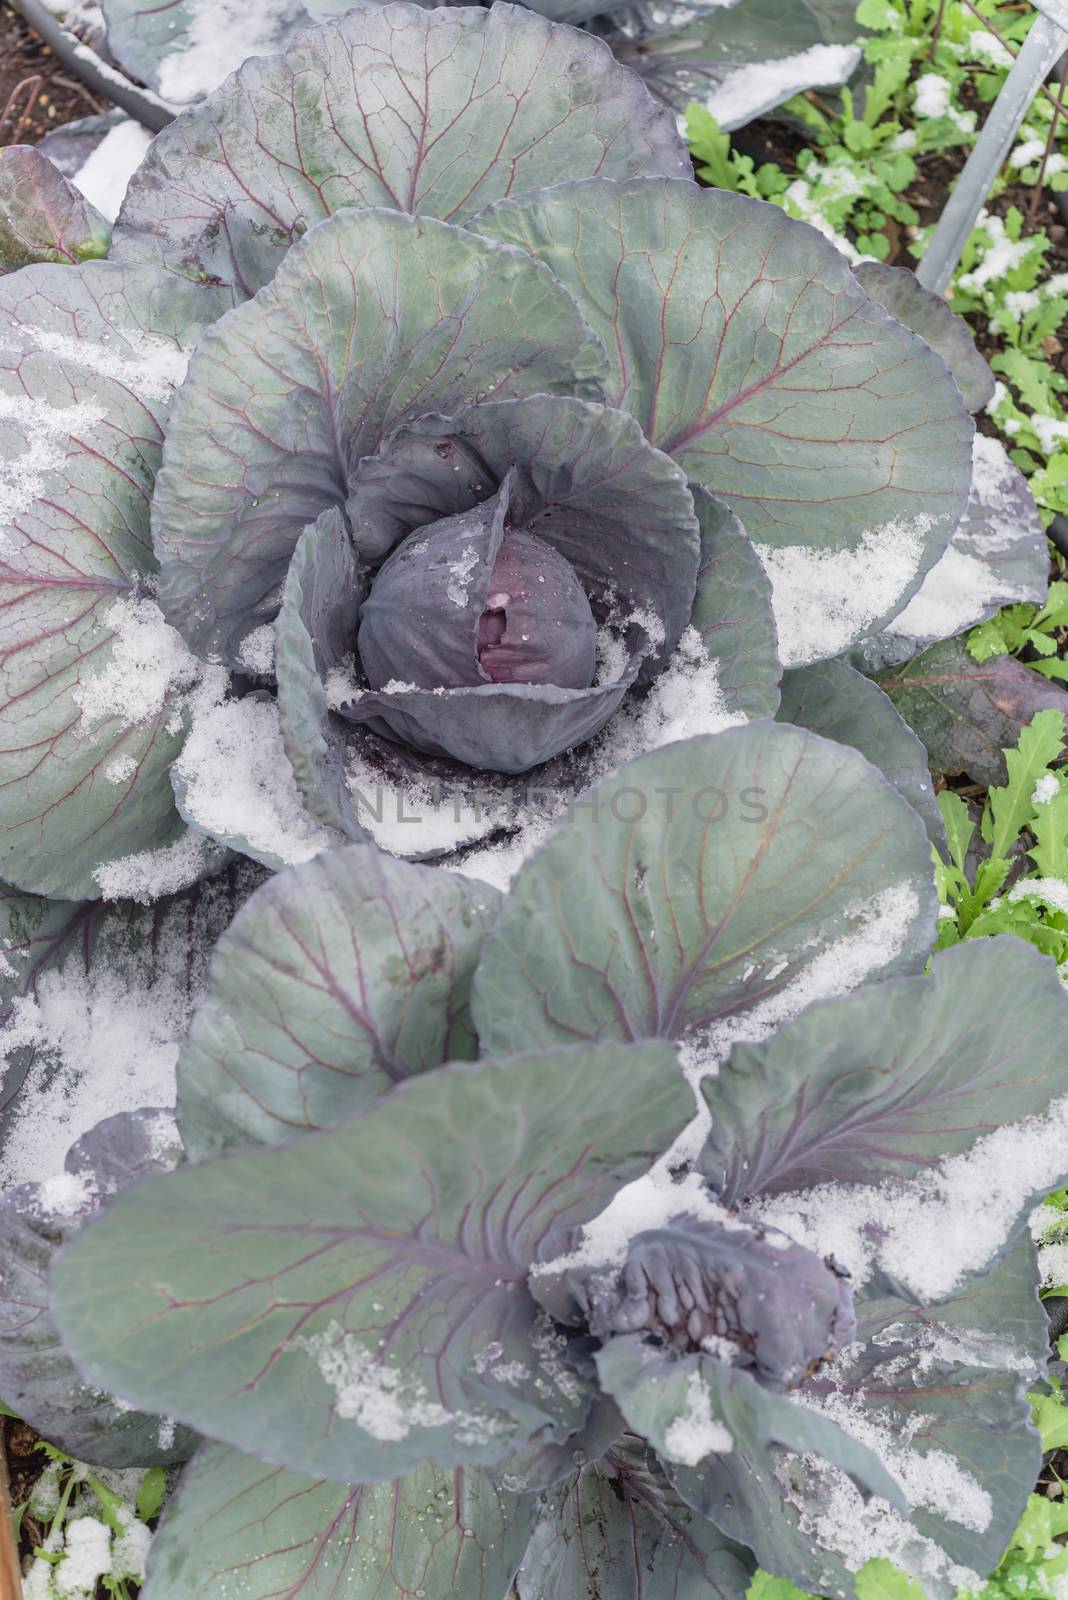 Row of organic red cabbage head in snow covered at community patch near Dallas, Texas, America. Homegrown winter crop in raised bed garden